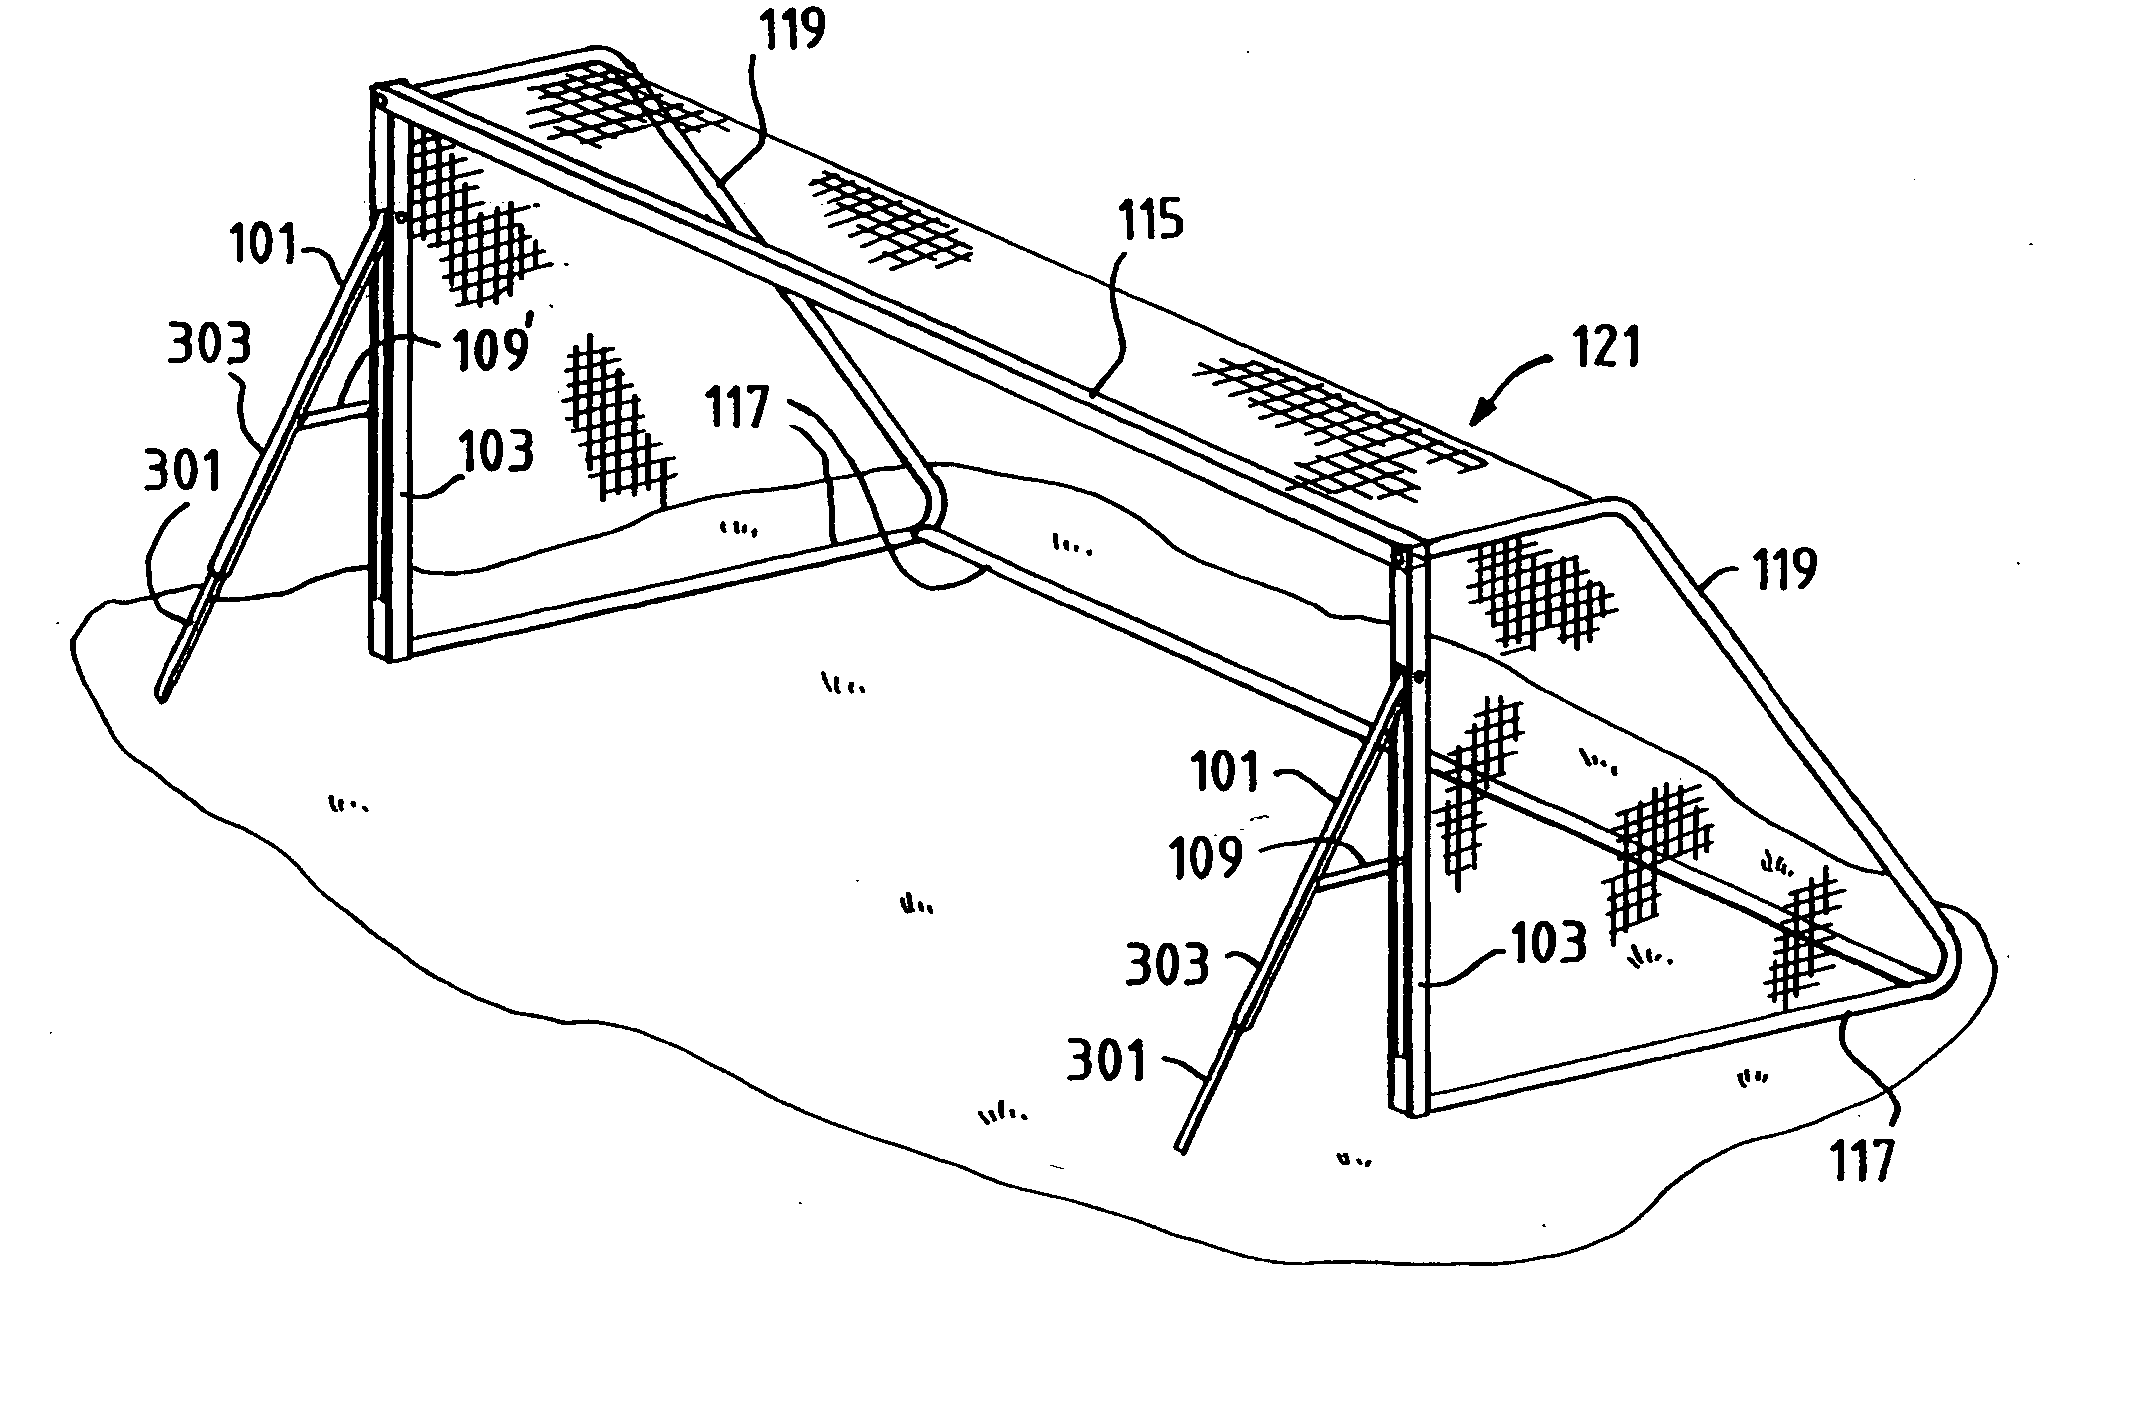 Apparatus for supporting a goal upright